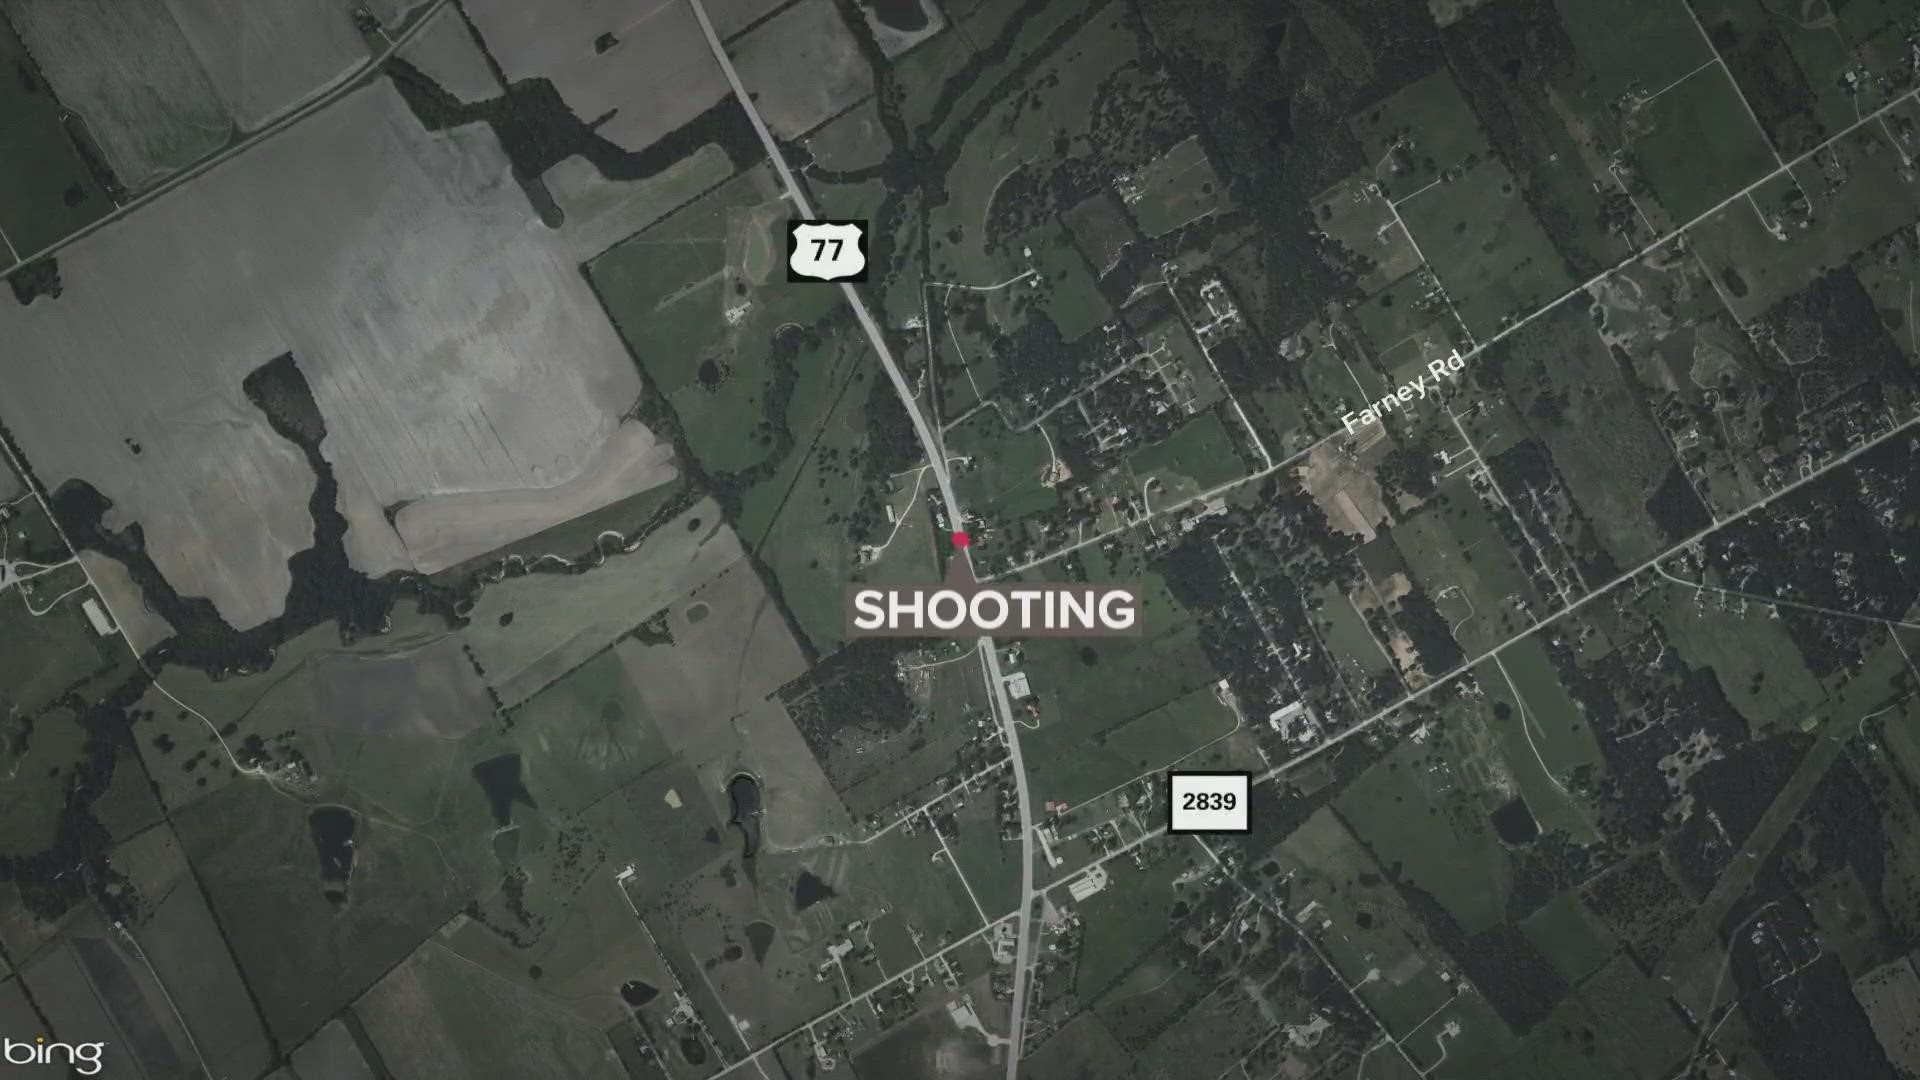 According to the McLennan County Sheriff's Office, two people are currently being questioned.